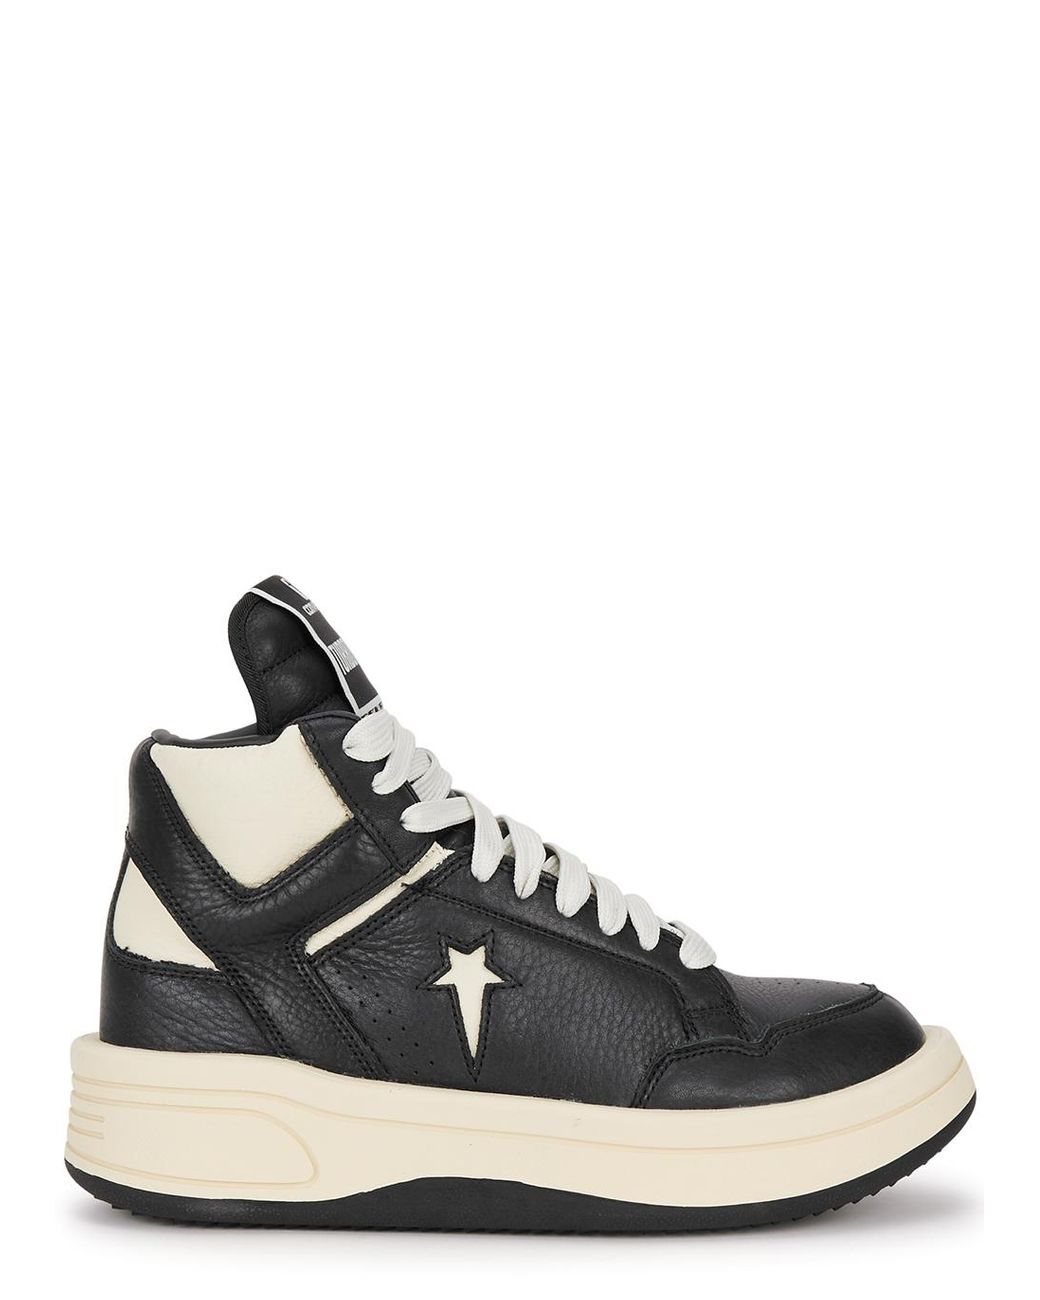 Rick Owens DRKSHDW X Converse Turbowpn Panelled Leather Sneakers in ...